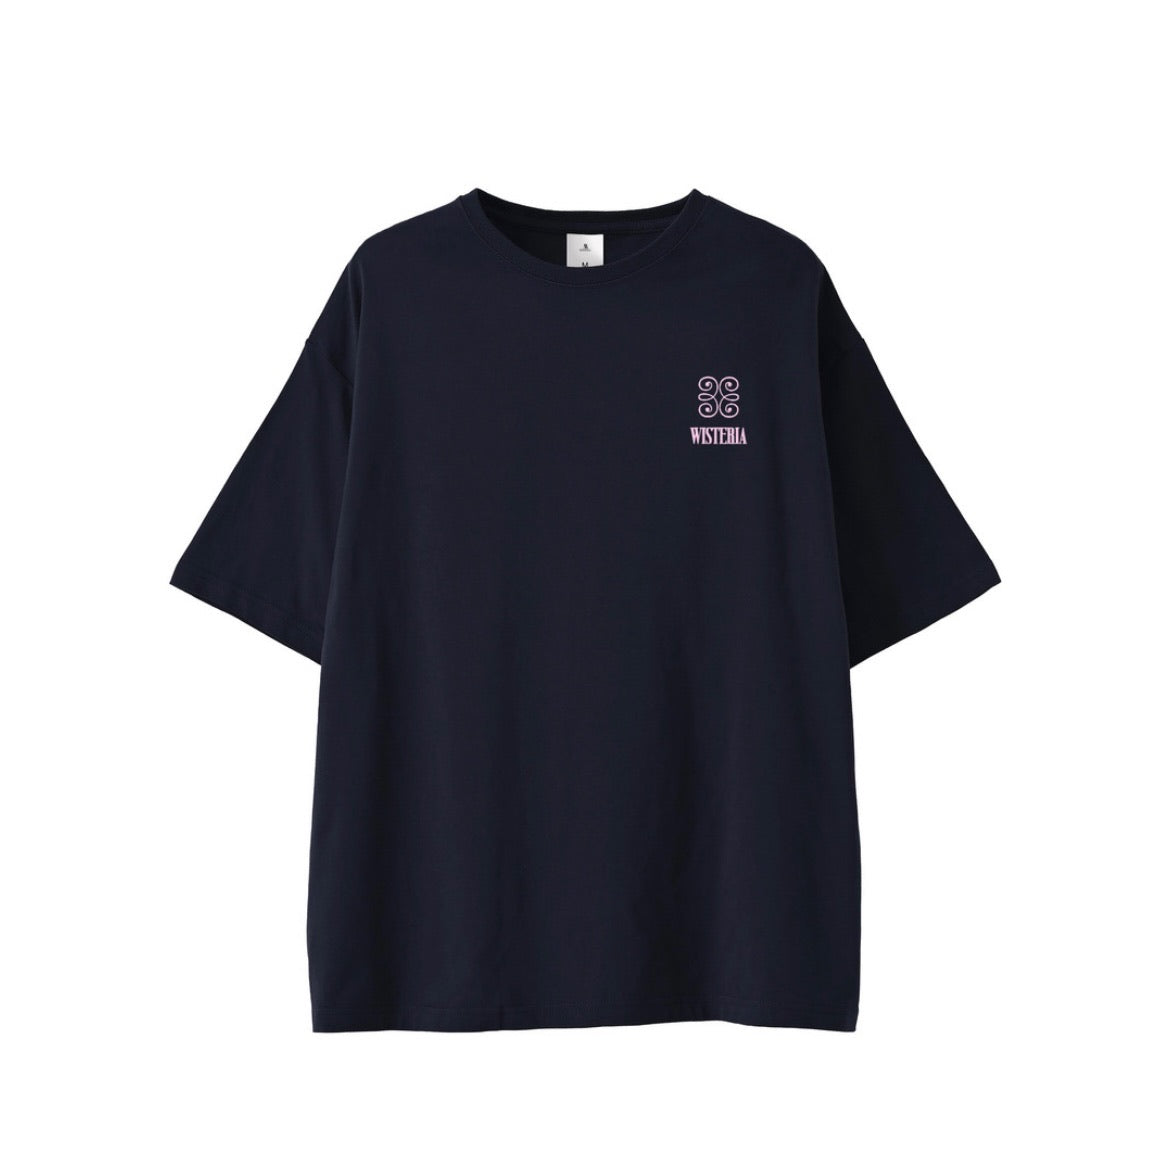 Monogram Embroidery T-shirt -Navy×Pink-